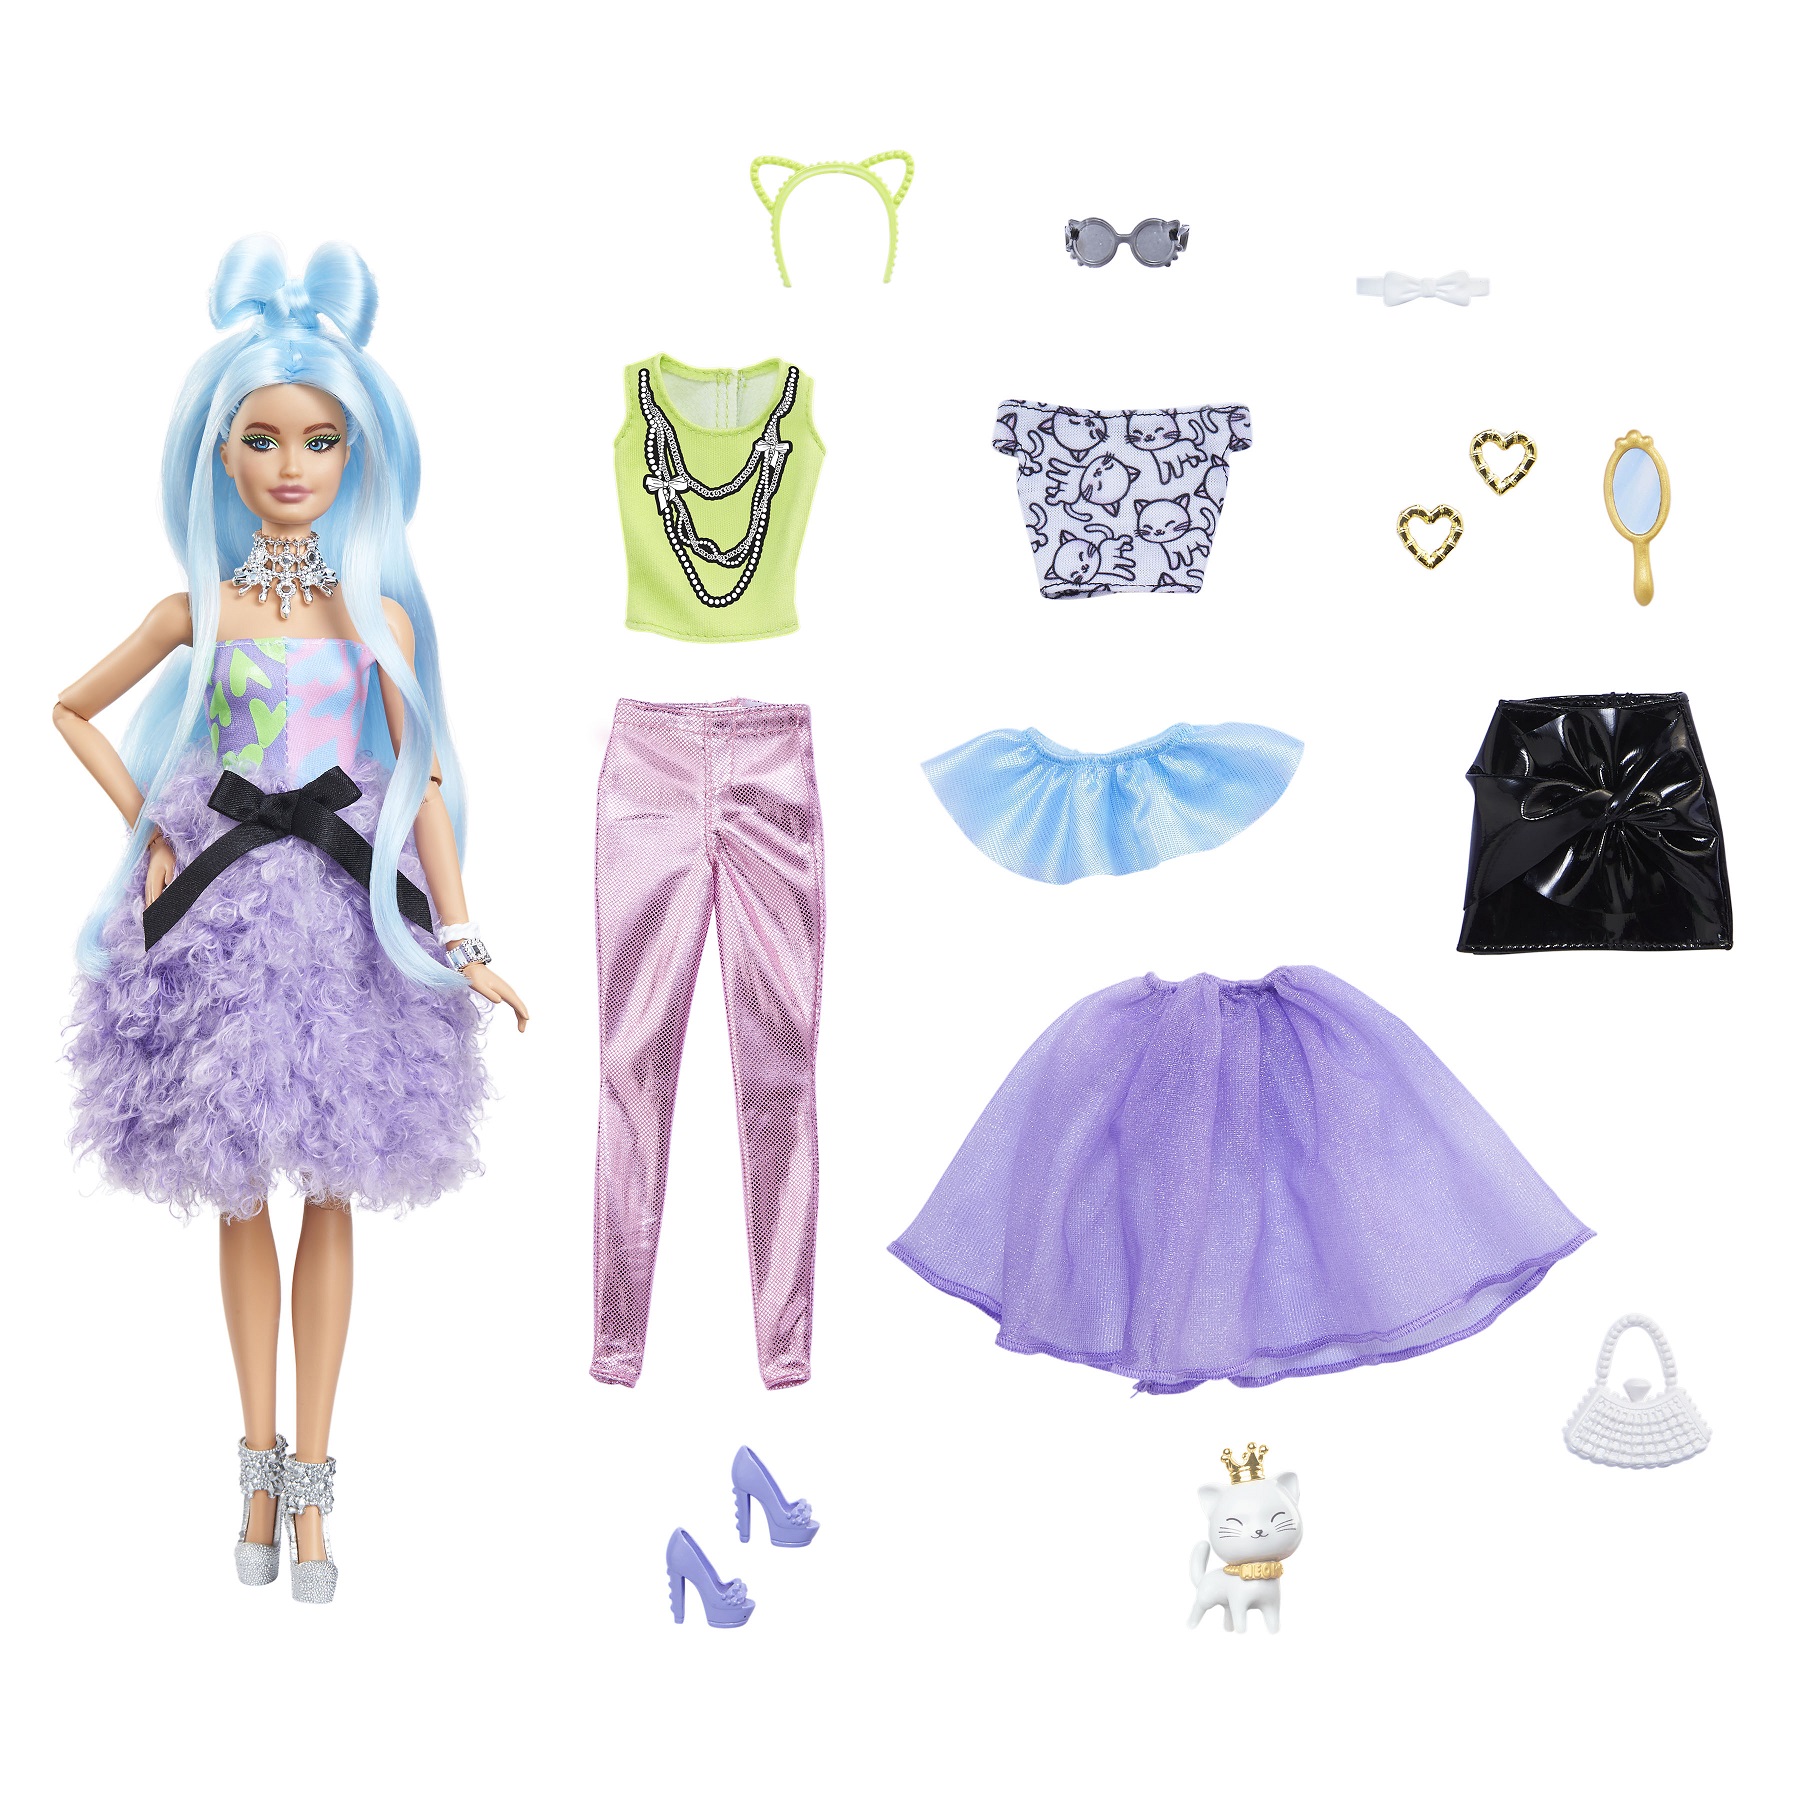 Barbie Extra Deluxe Fashion Doll